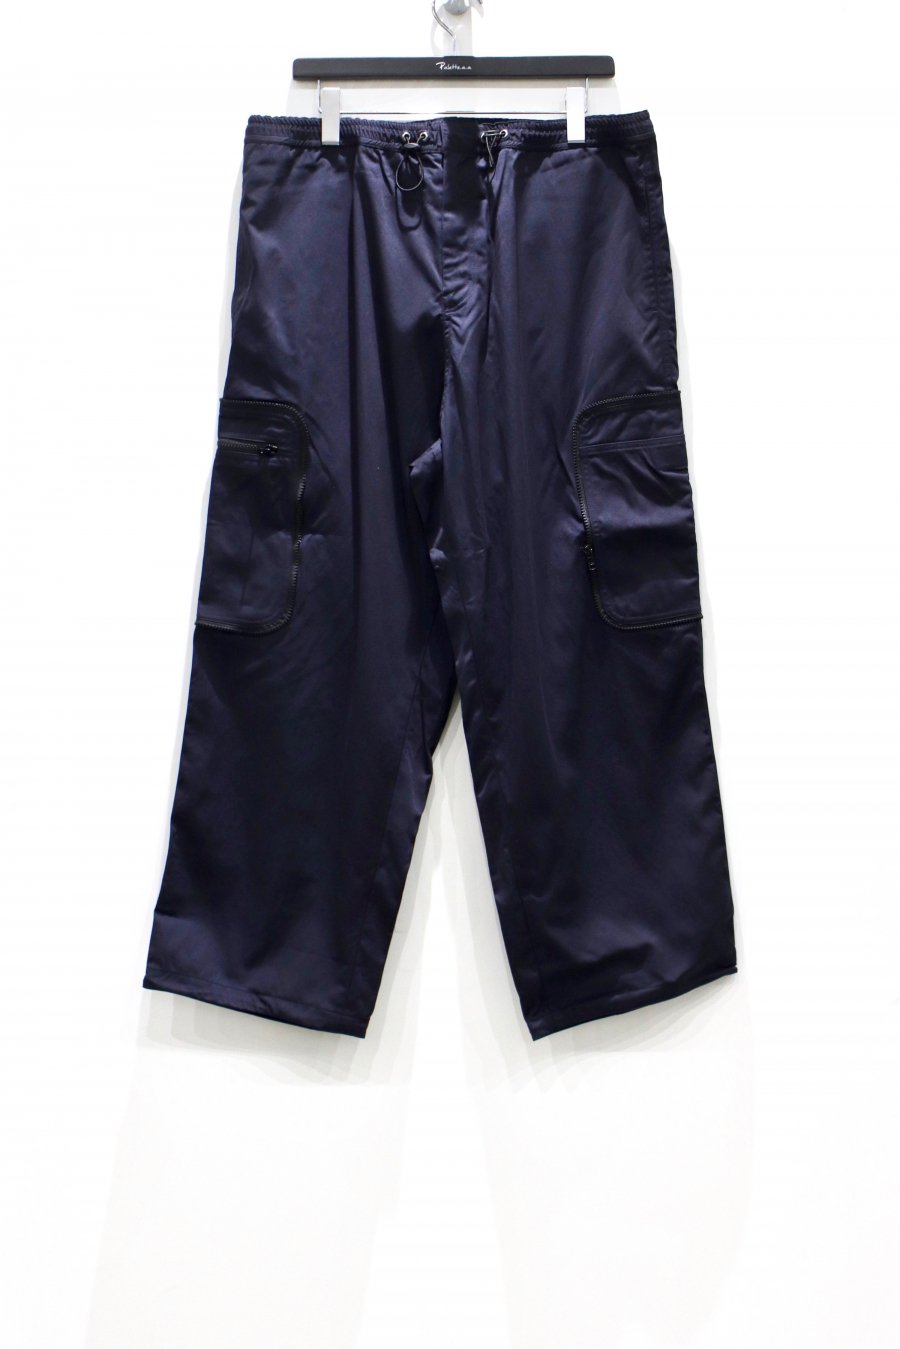 rajabrooke  PACKABLE OVER PANTS<img class='new_mark_img2' src='https://img.shop-pro.jp/img/new/icons15.gif' style='border:none;display:inline;margin:0px;padding:0px;width:auto;' />